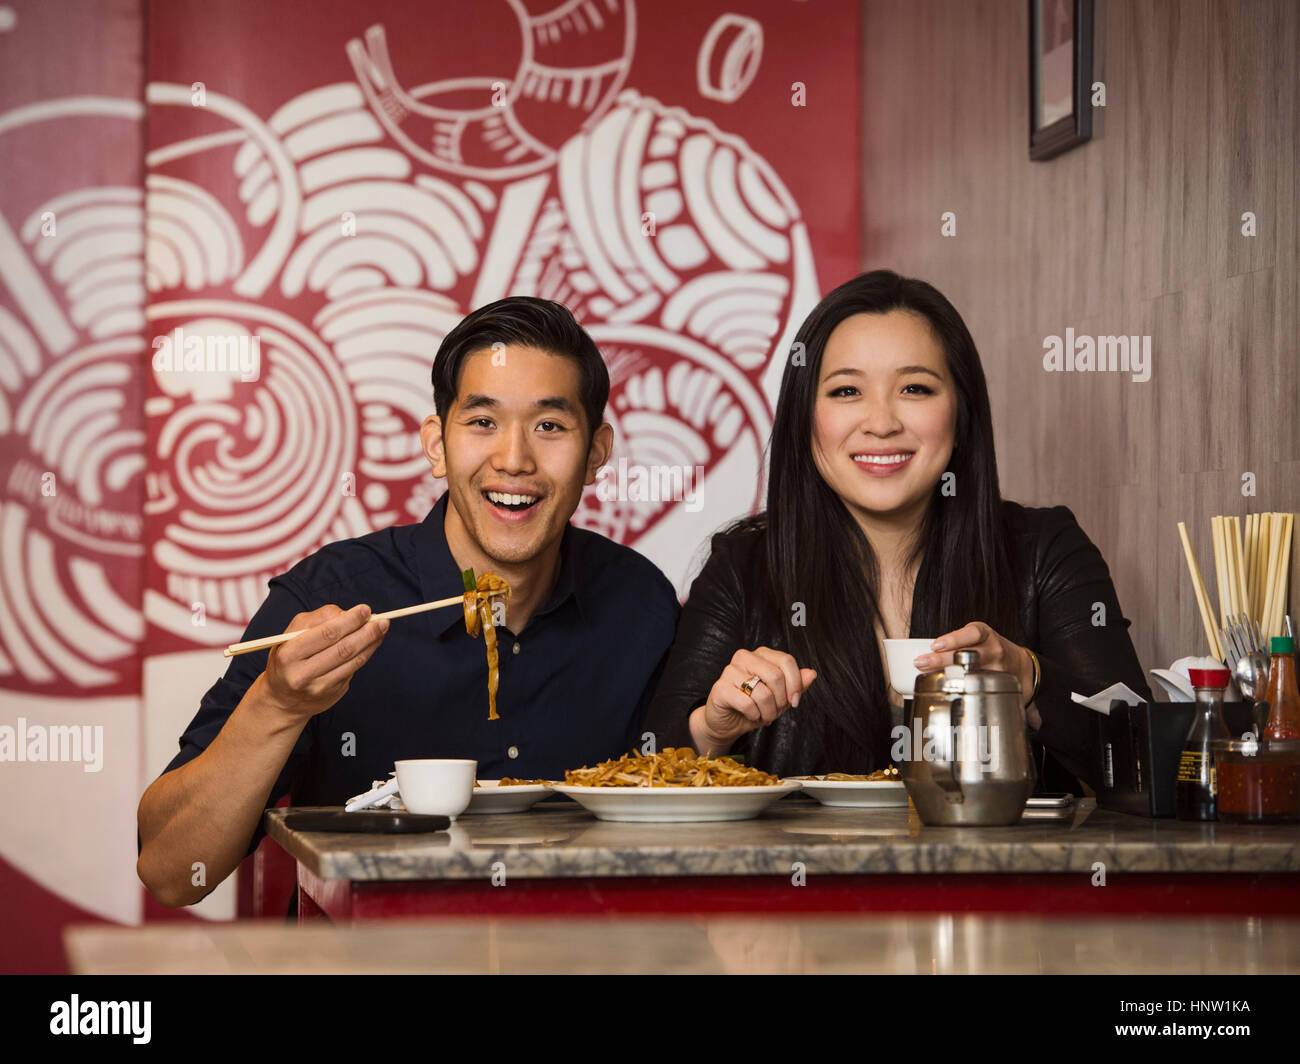 Smiling Chinese couple posing in restaurant Stock Photo